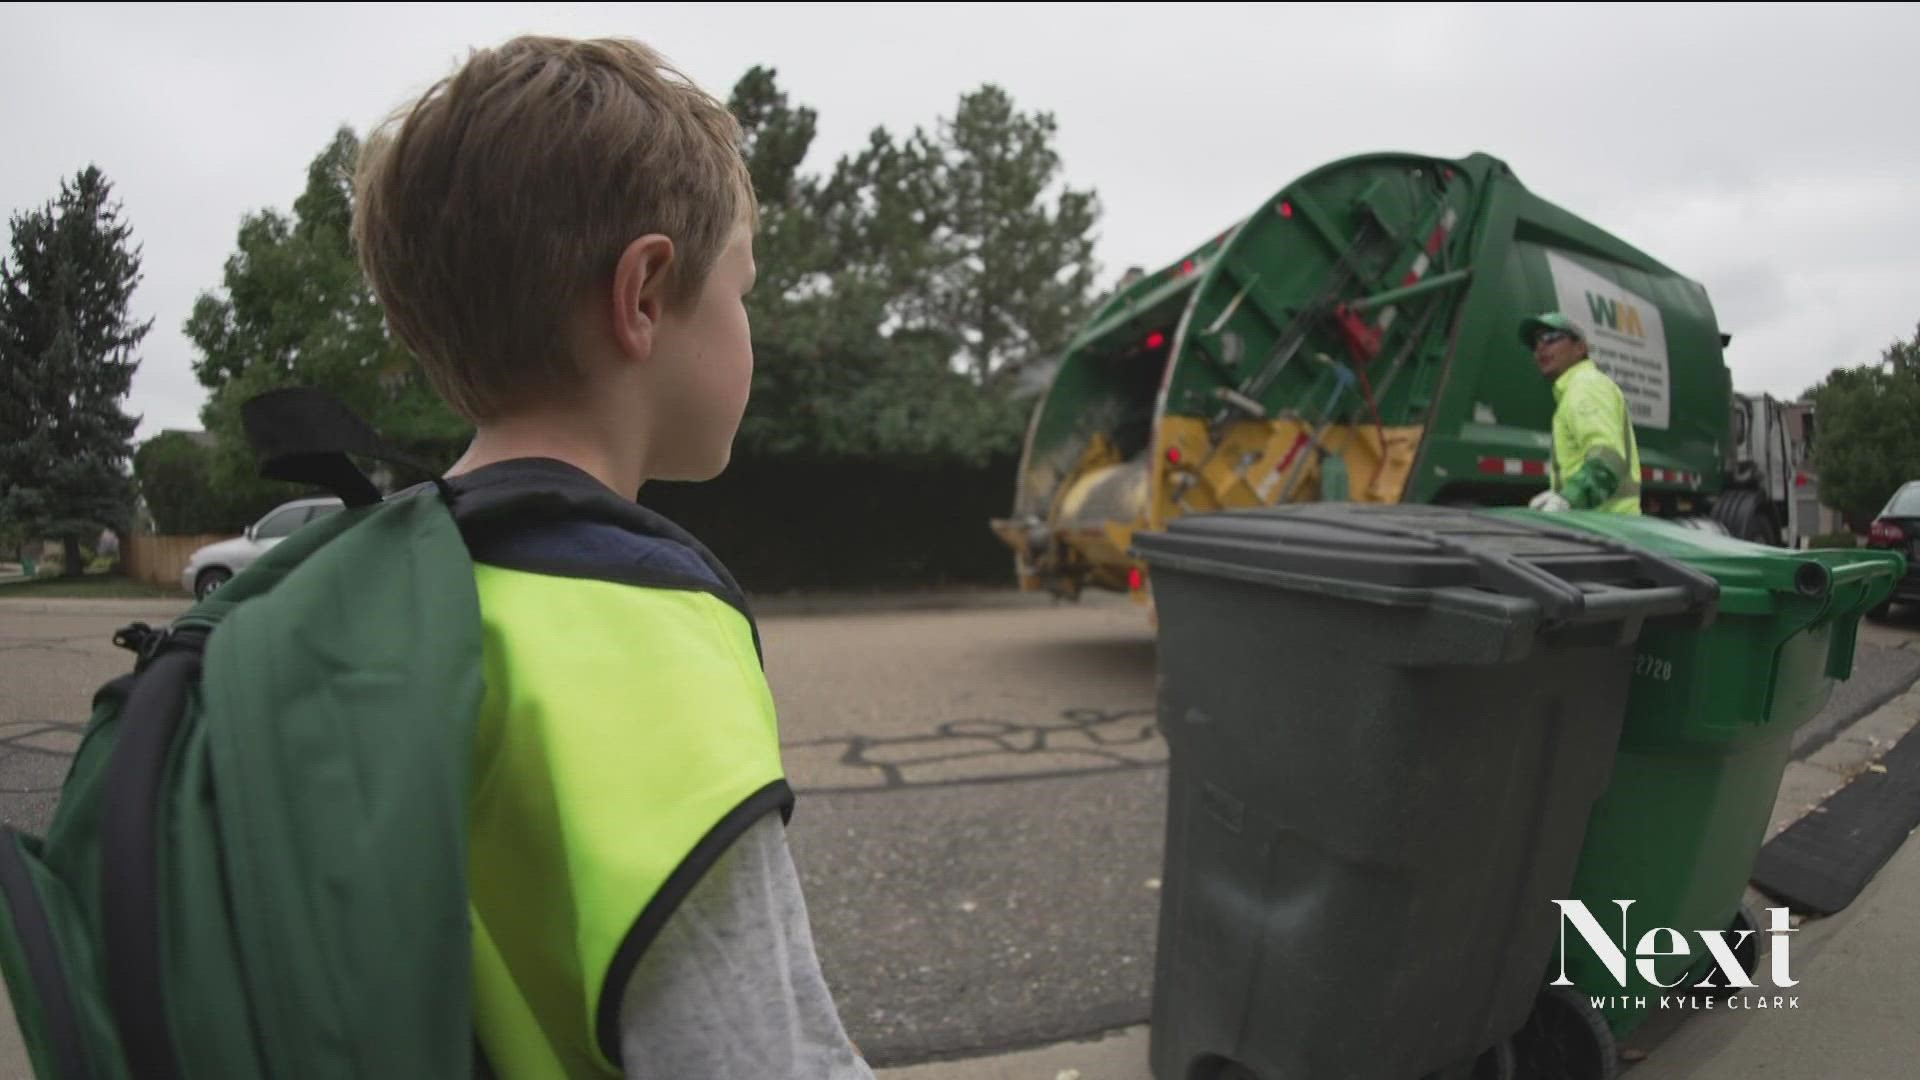 Kids wait for the garbage truck to come by, and the truck operators look forward to their biggest supporters.